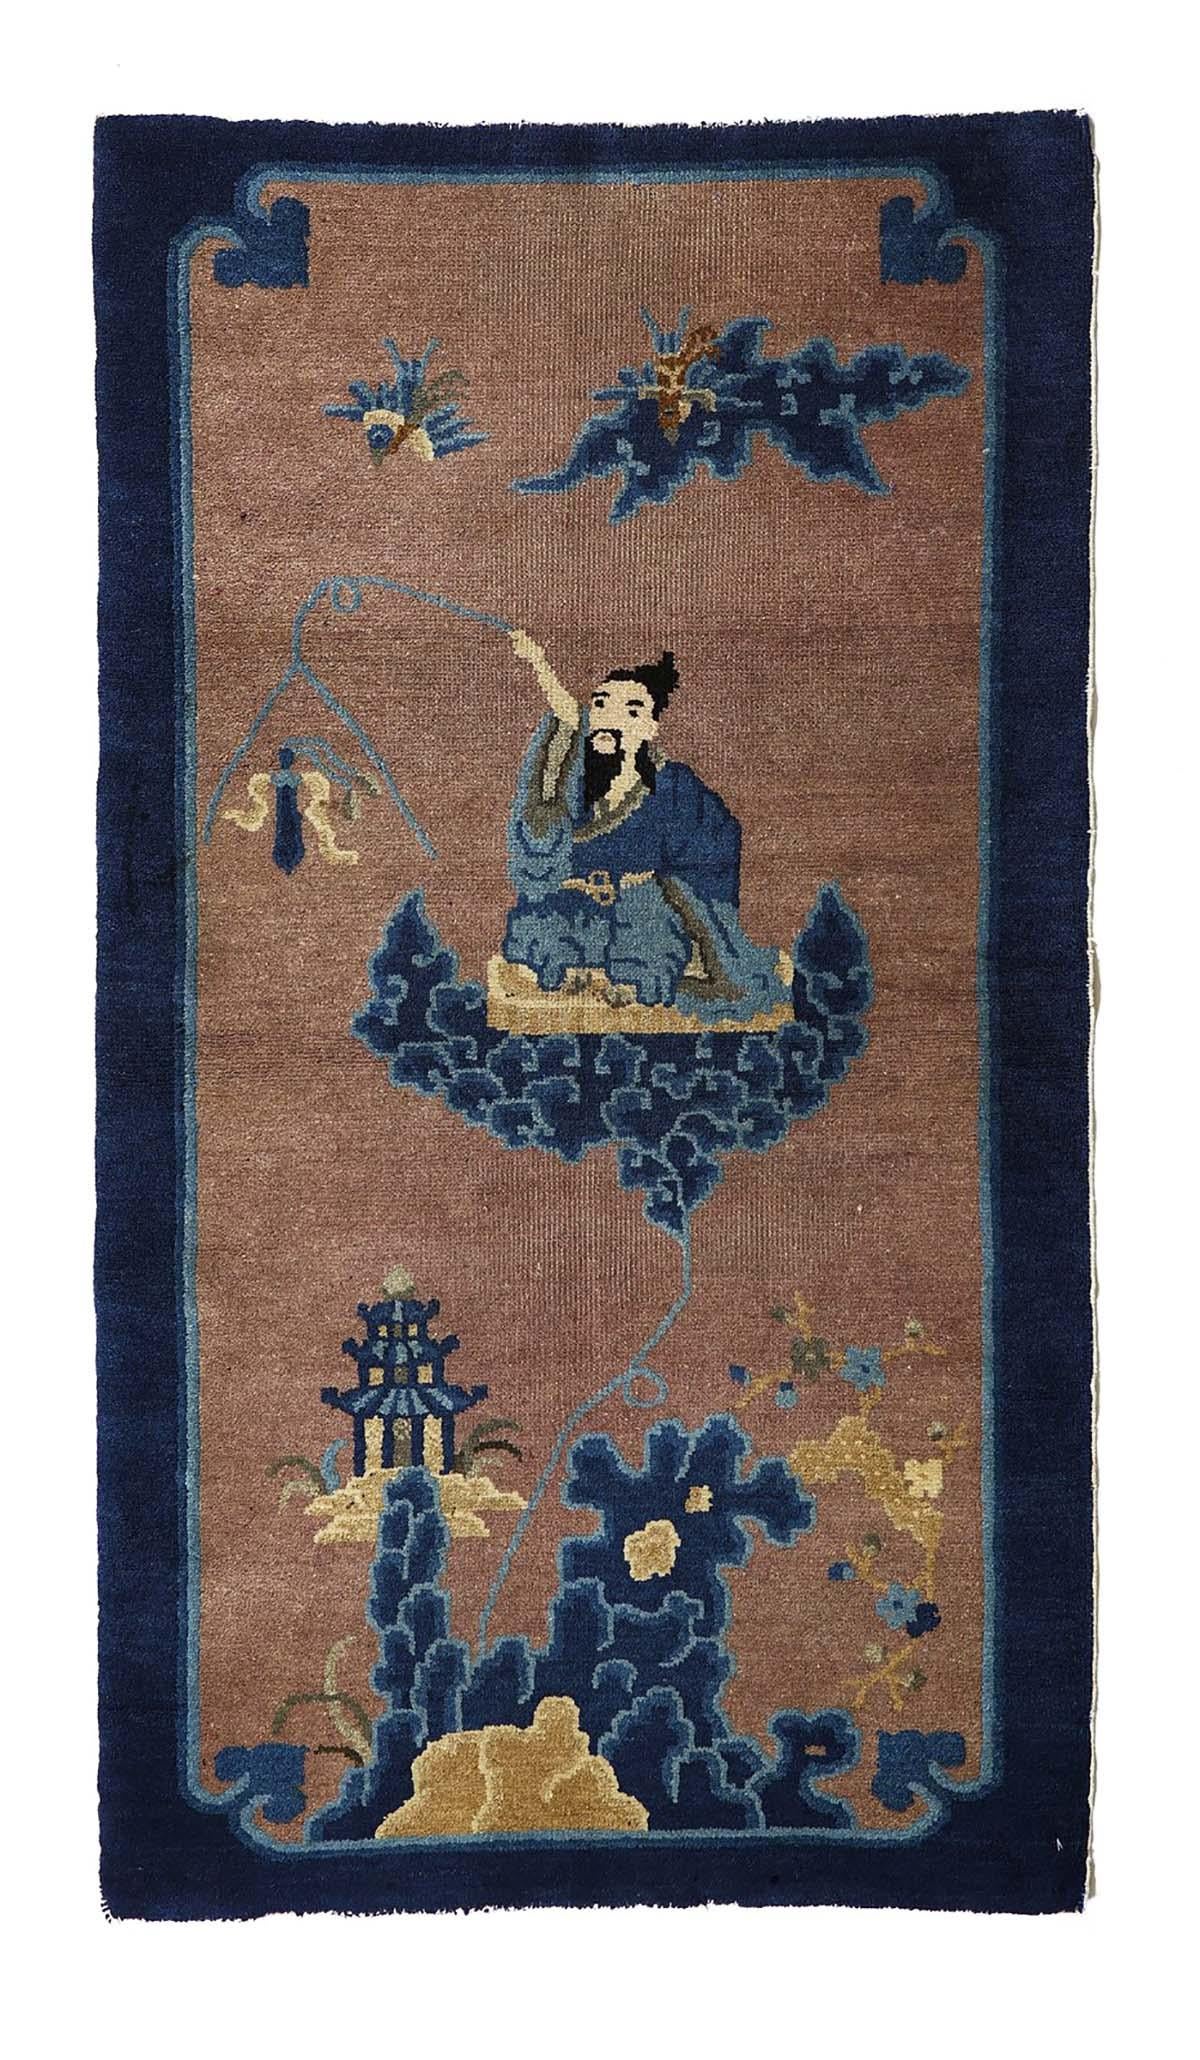 Behold, a magnificent antique carpet from the late Ming Dynasty period, a true testament to the artistry and craftsmanship of ancient China. Crafted from the finest wool and meticulously hand-knotted, this masterpiece is a window into a bygone era,